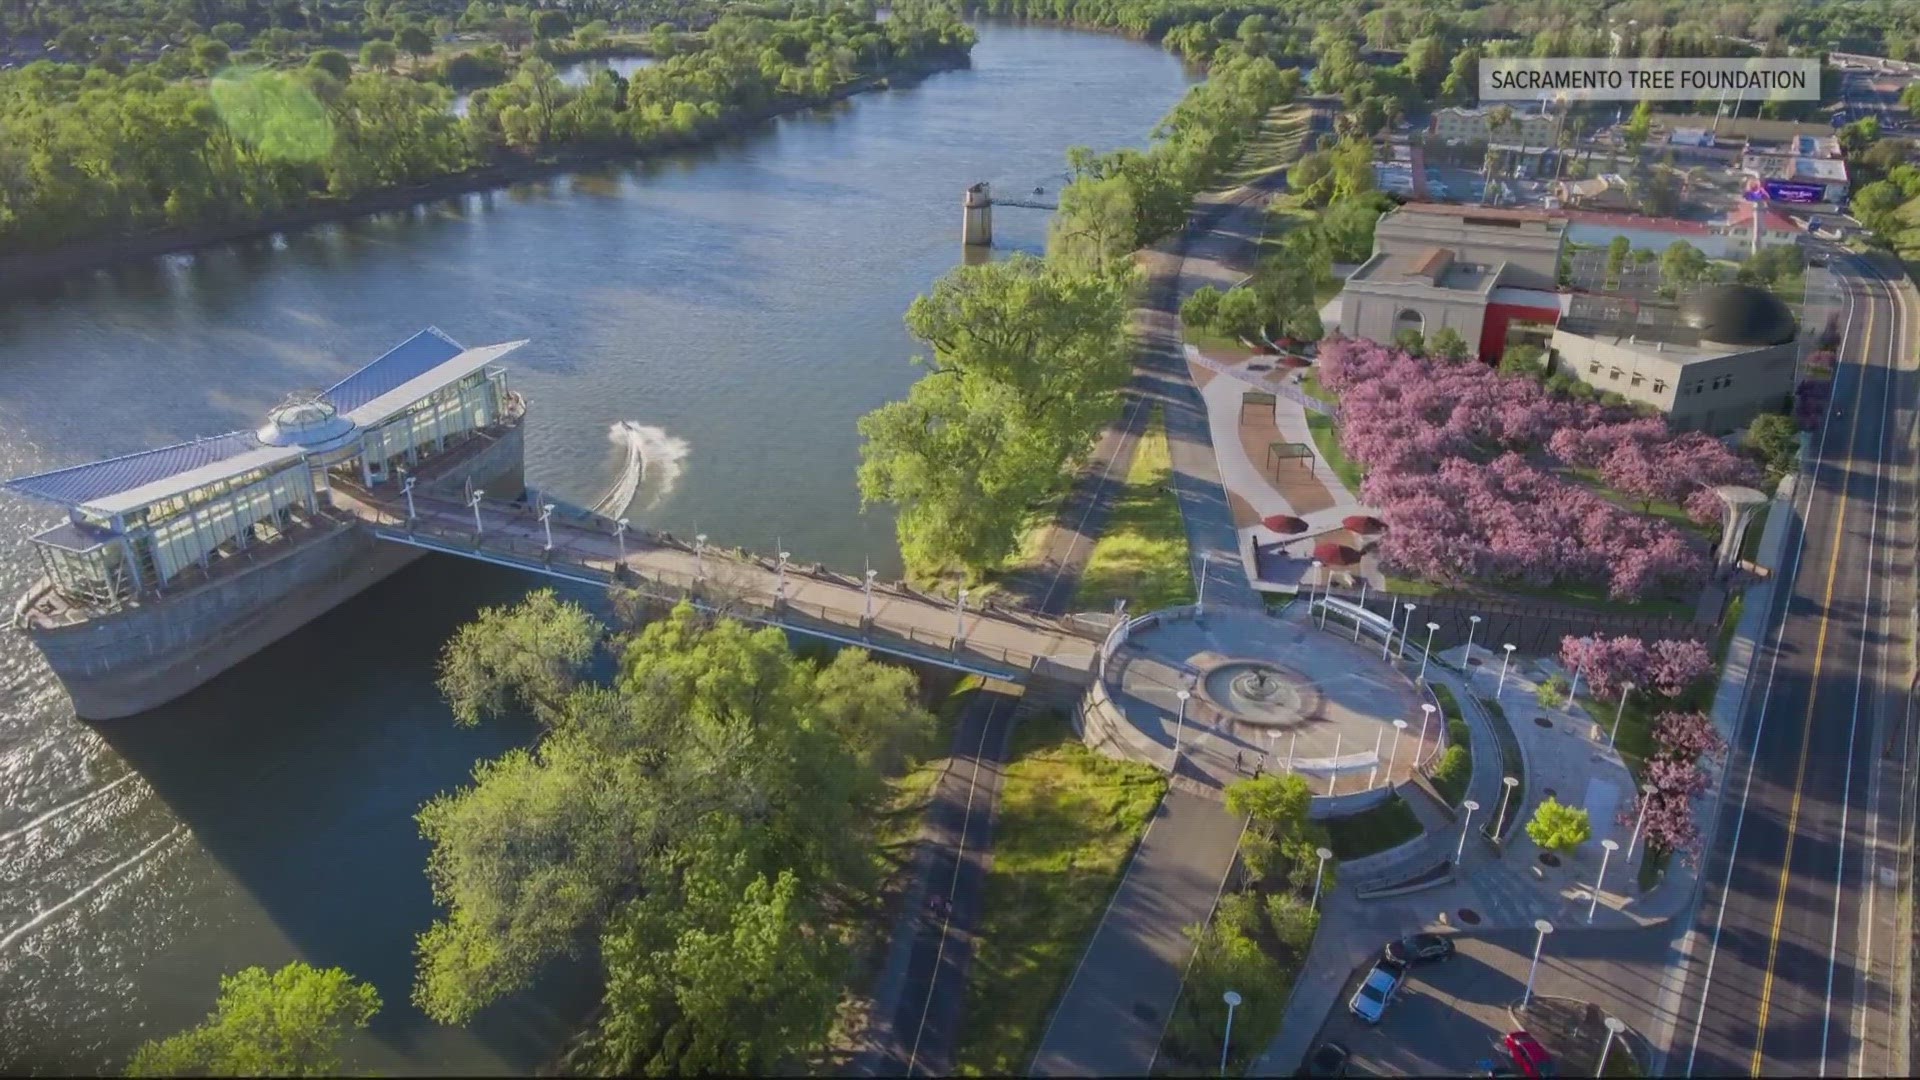 Sacramento Cherry Blossom Park is expected to open in the summer